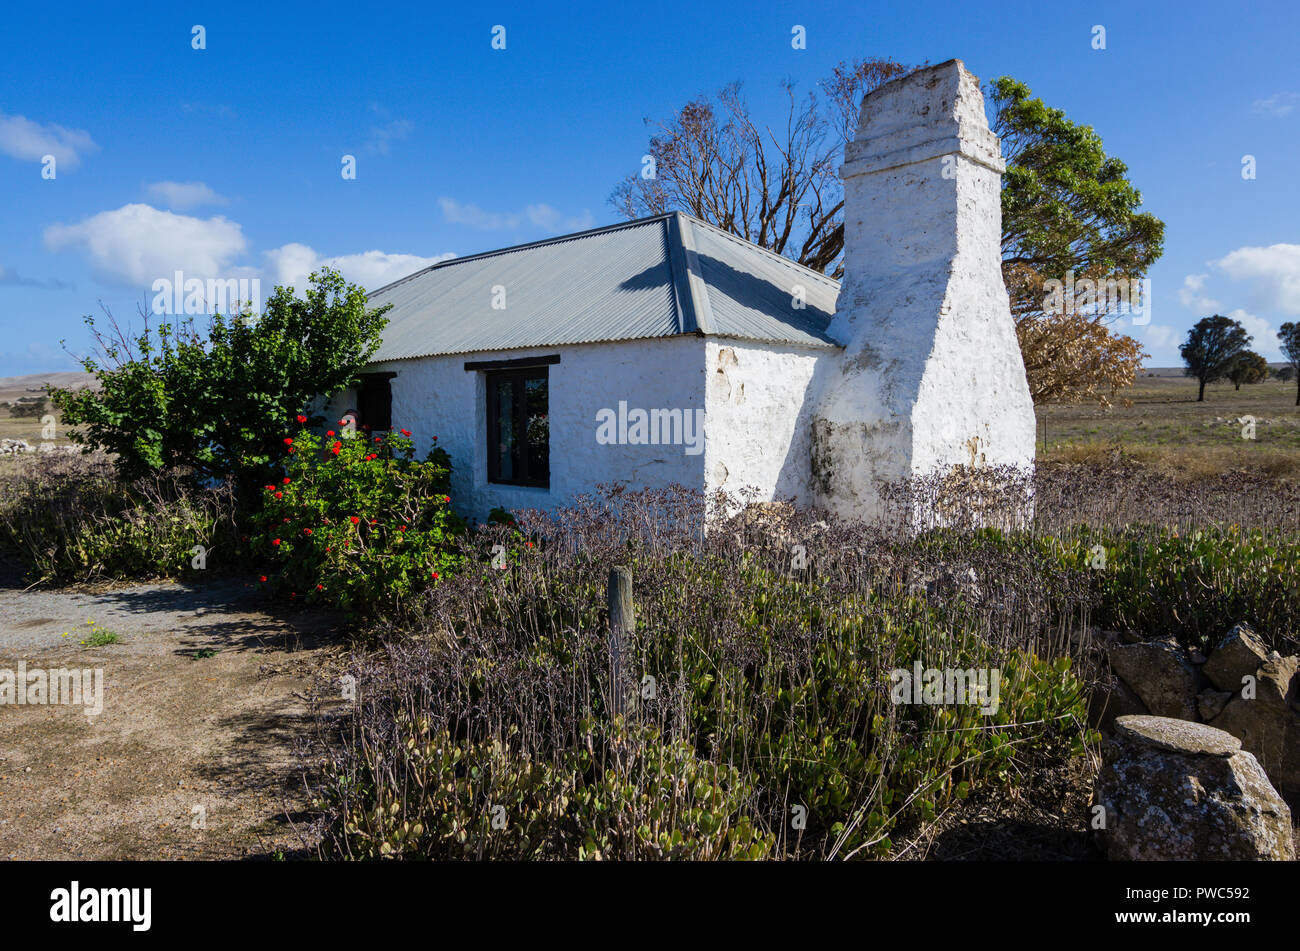 The white stoned walled building of the restored Lake Hamilton Eating House on the Flinders Highway near Coffin Bay South Australia Stock Photo